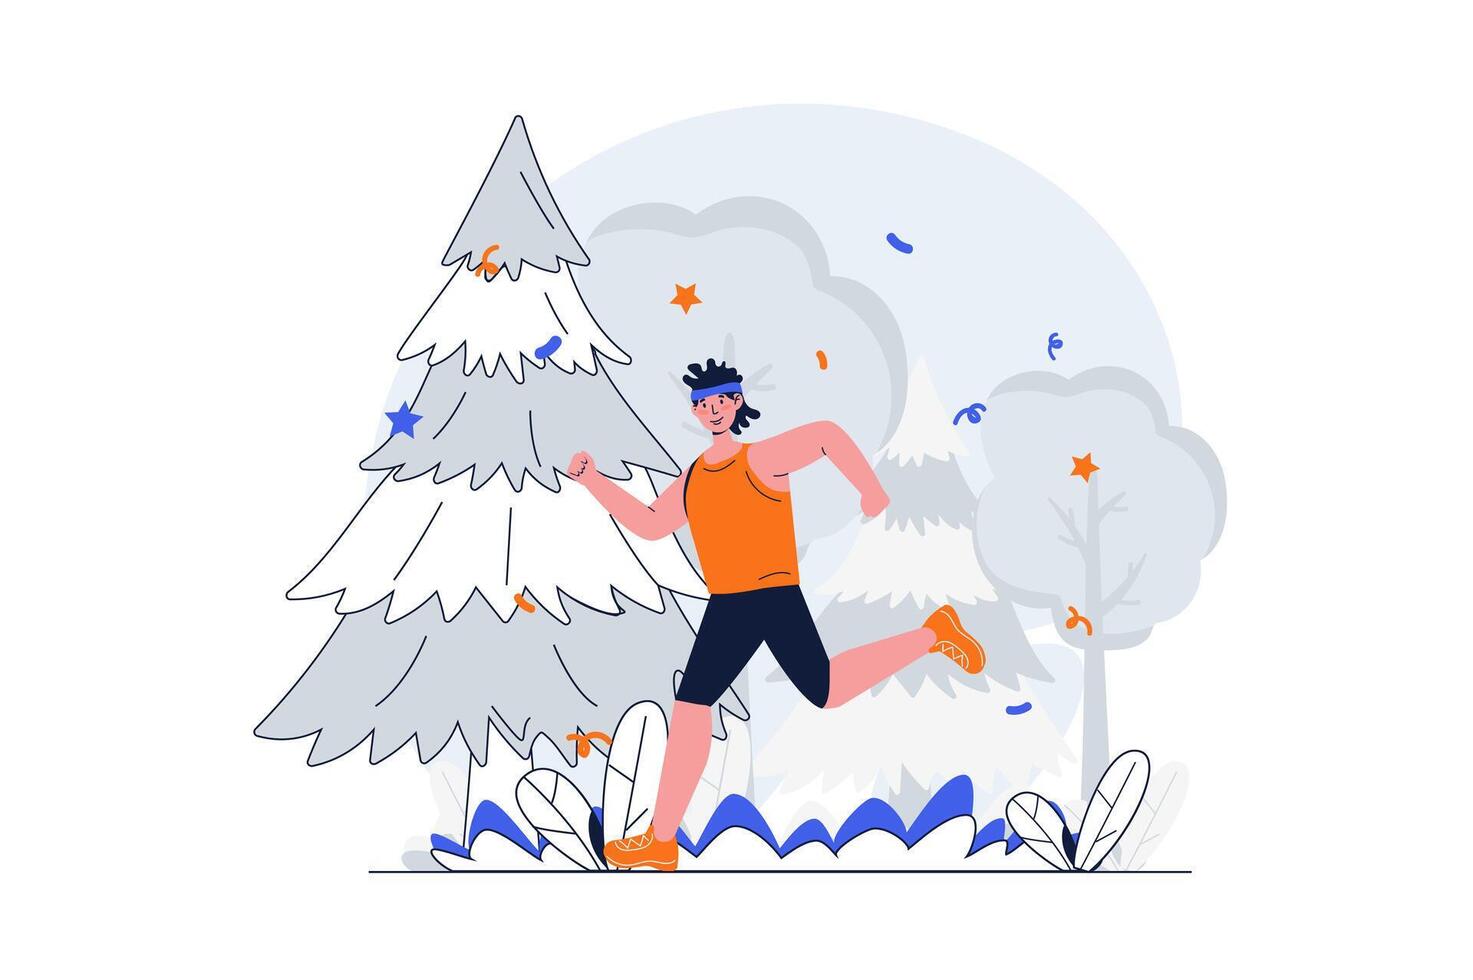 Sport training web concept with character scene. Man in sportswear running in forest, doing cardio workout. People situation in flat design. Vector illustration for social media marketing material.